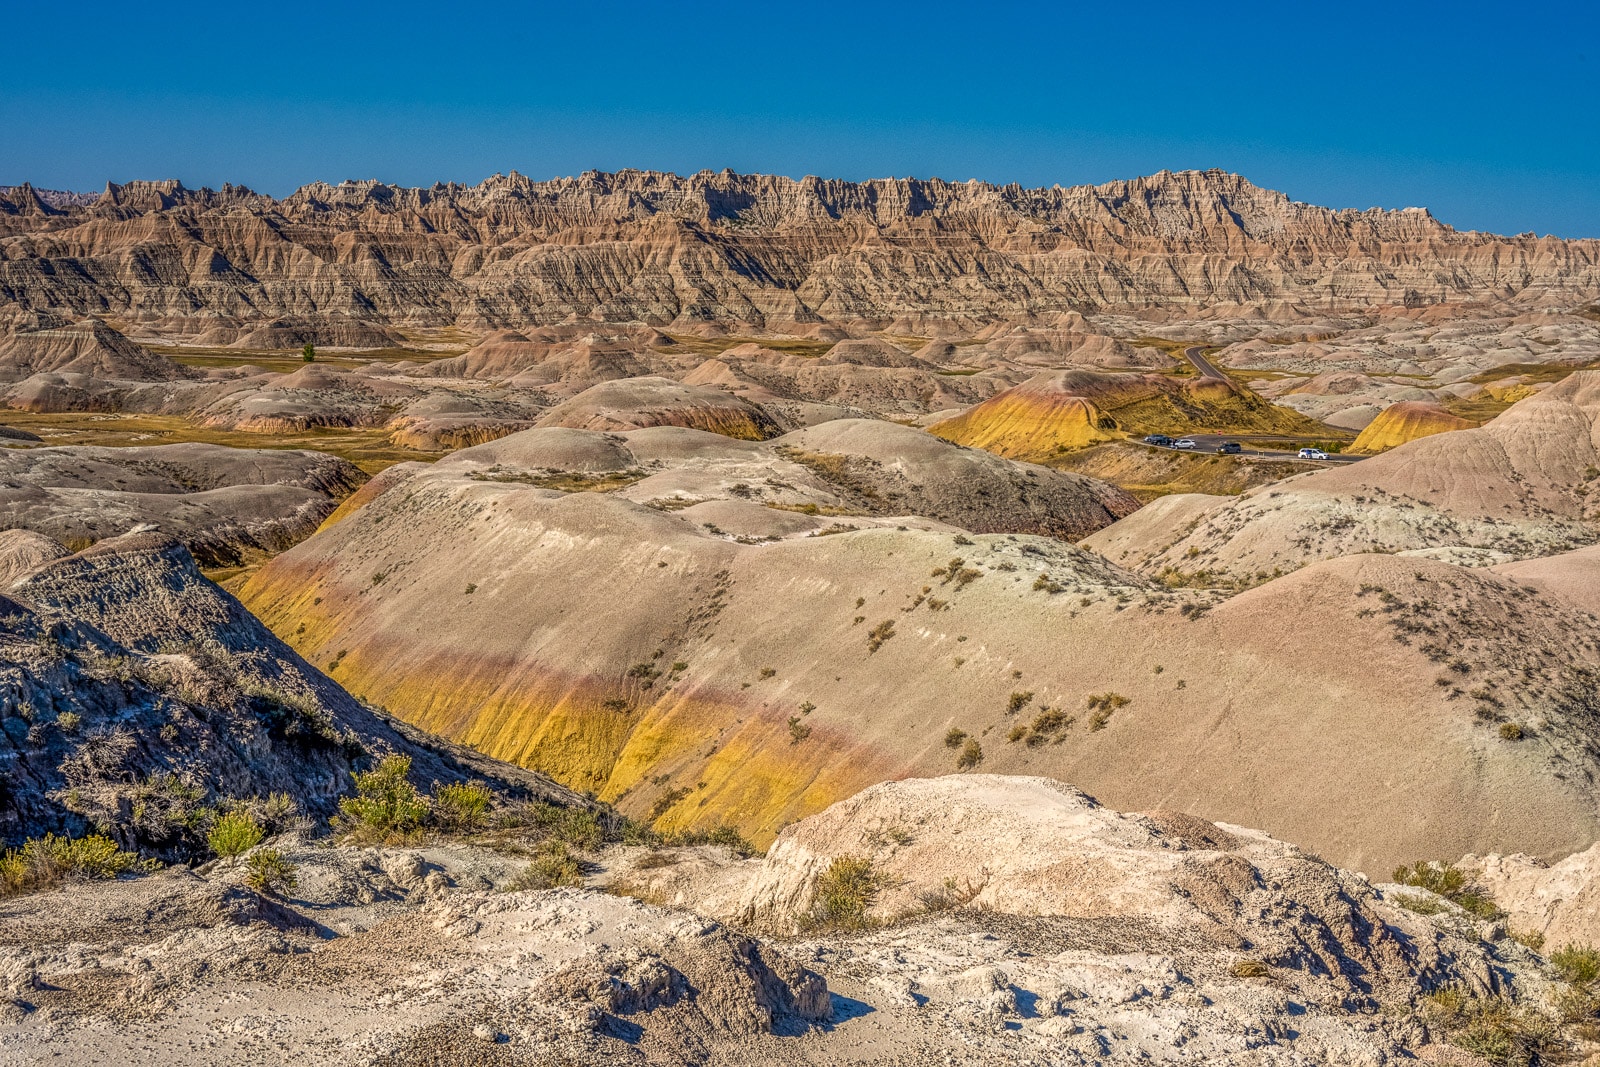 A view of the Yellow Mounds Formation from Yellow Mounds Overlook in Badlands National Park, South Dakota. This yellow formation is the topmost layer of the Pierre Shale (the base formation of the badlands strata). the yellow color is do to chemicals from ancient decaying plants coloring the paleosol.